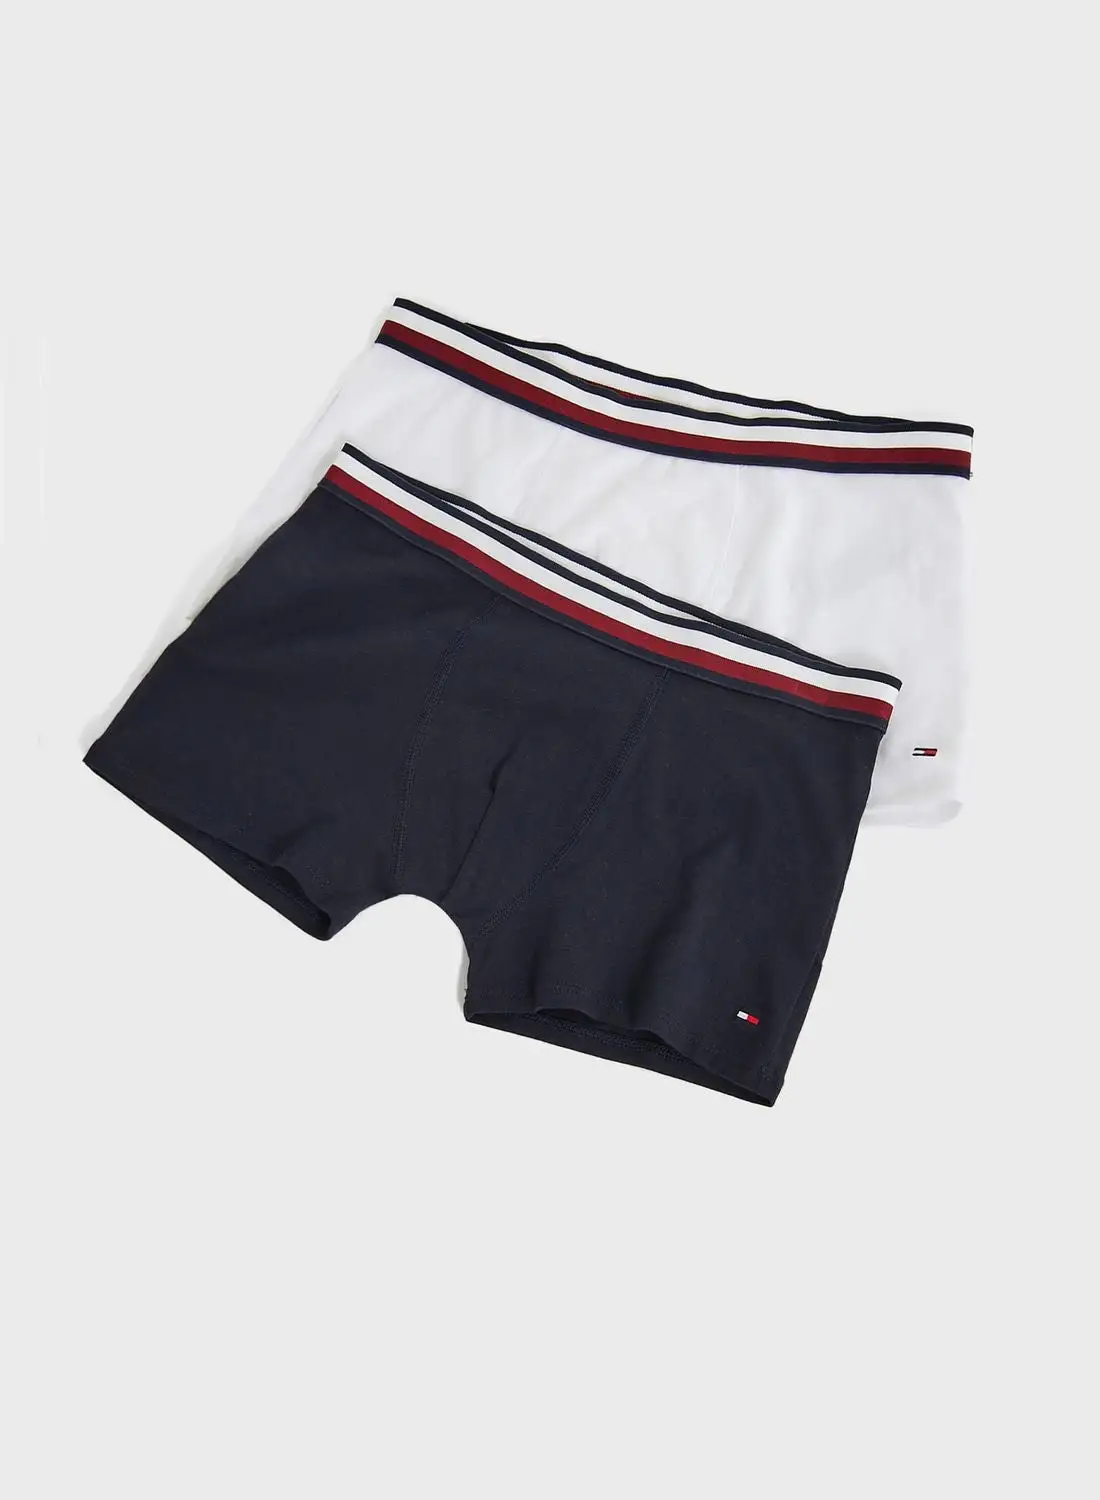 TOMMY HILFIGER Teen 2 Pack Trunk